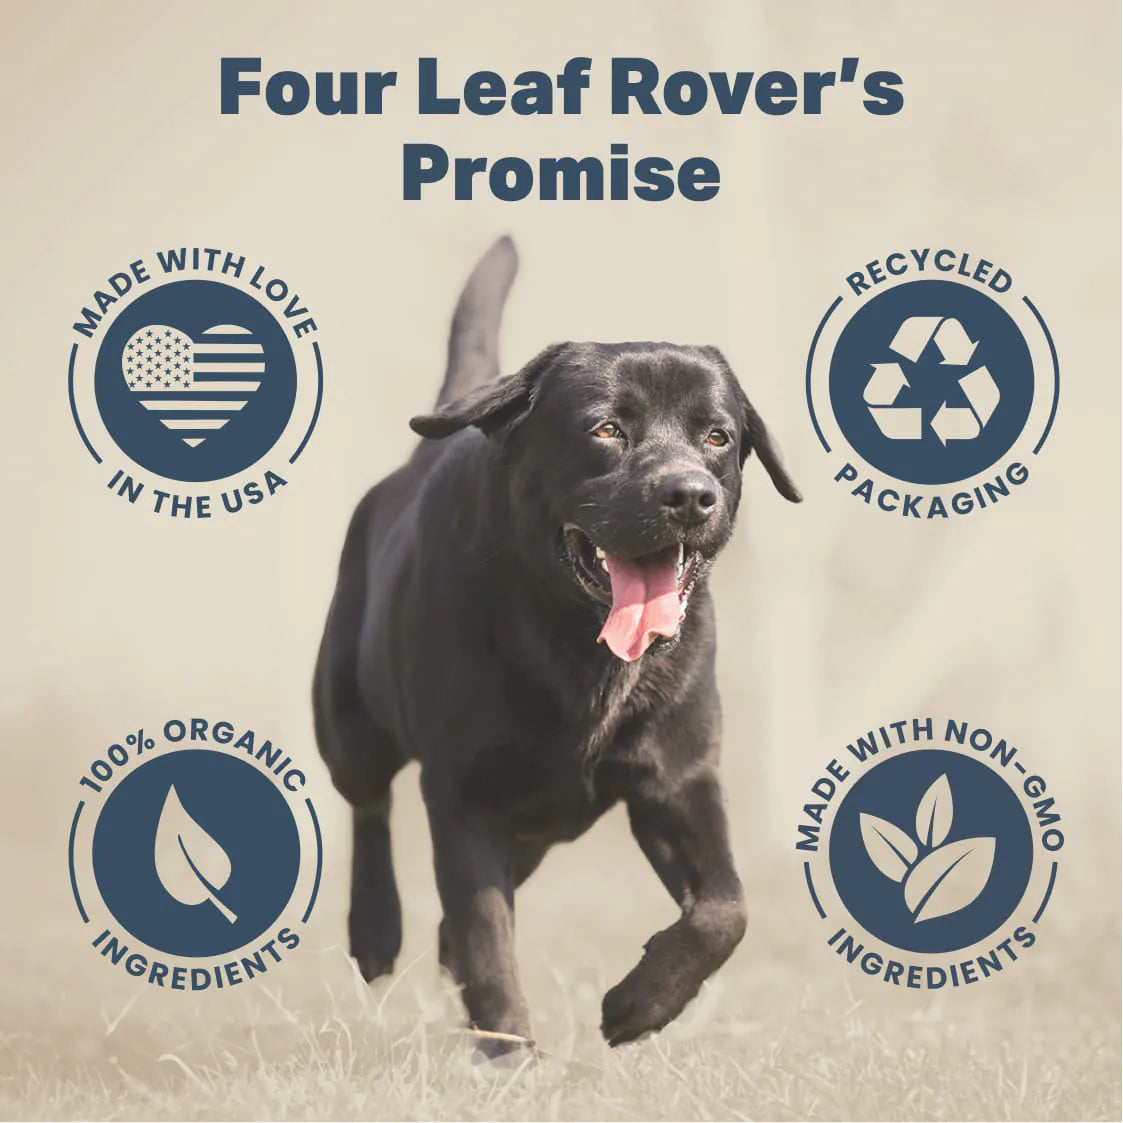 Four Leaf Rover - Red Rover - Organic Berries for Dogs - 76.5 g